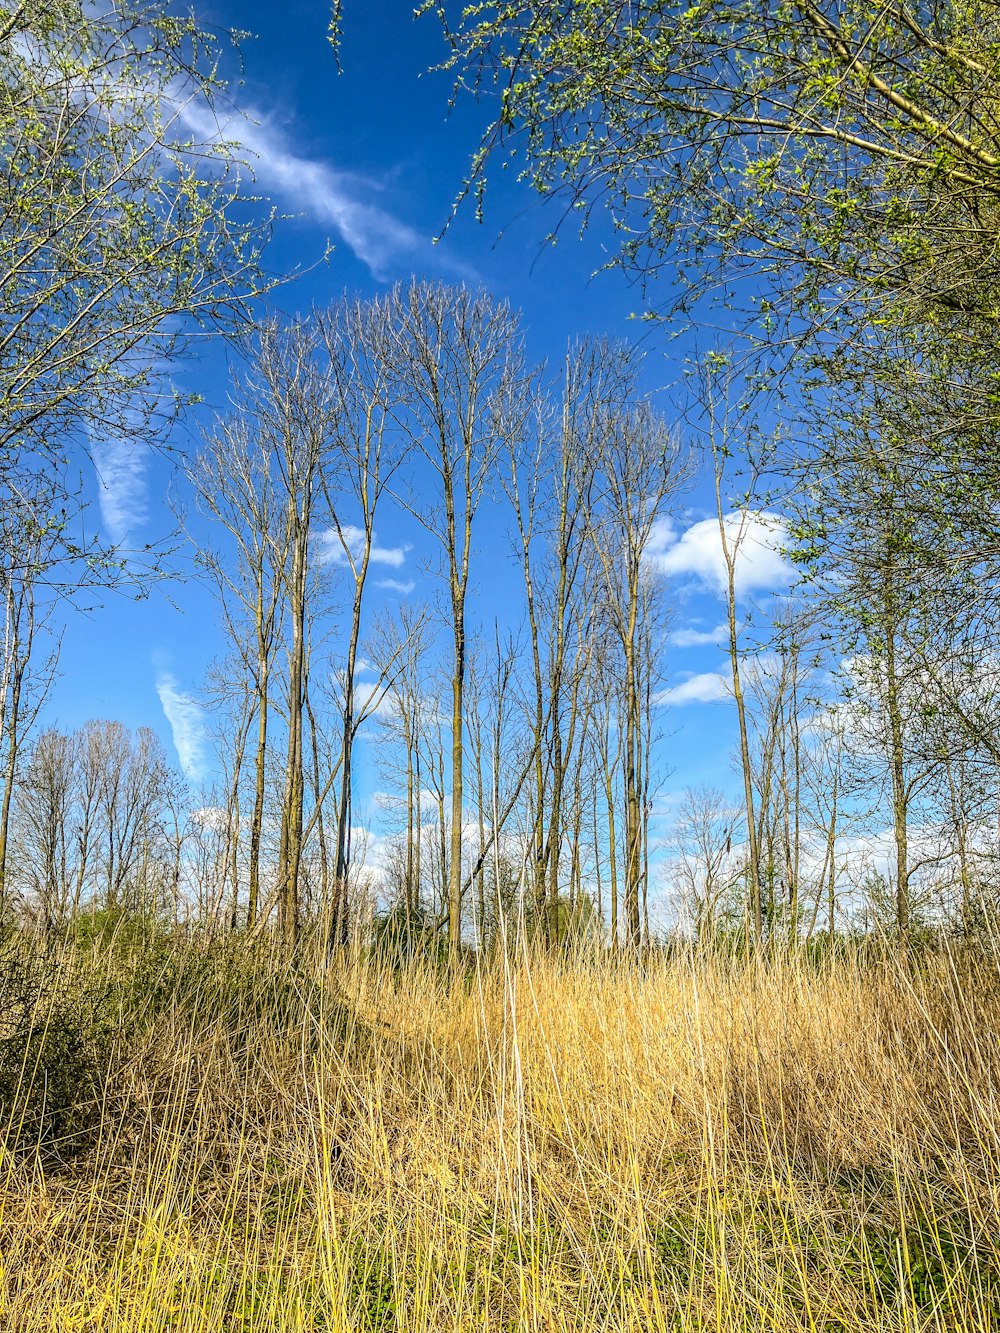 a field with tall grass and trees on a sunny day